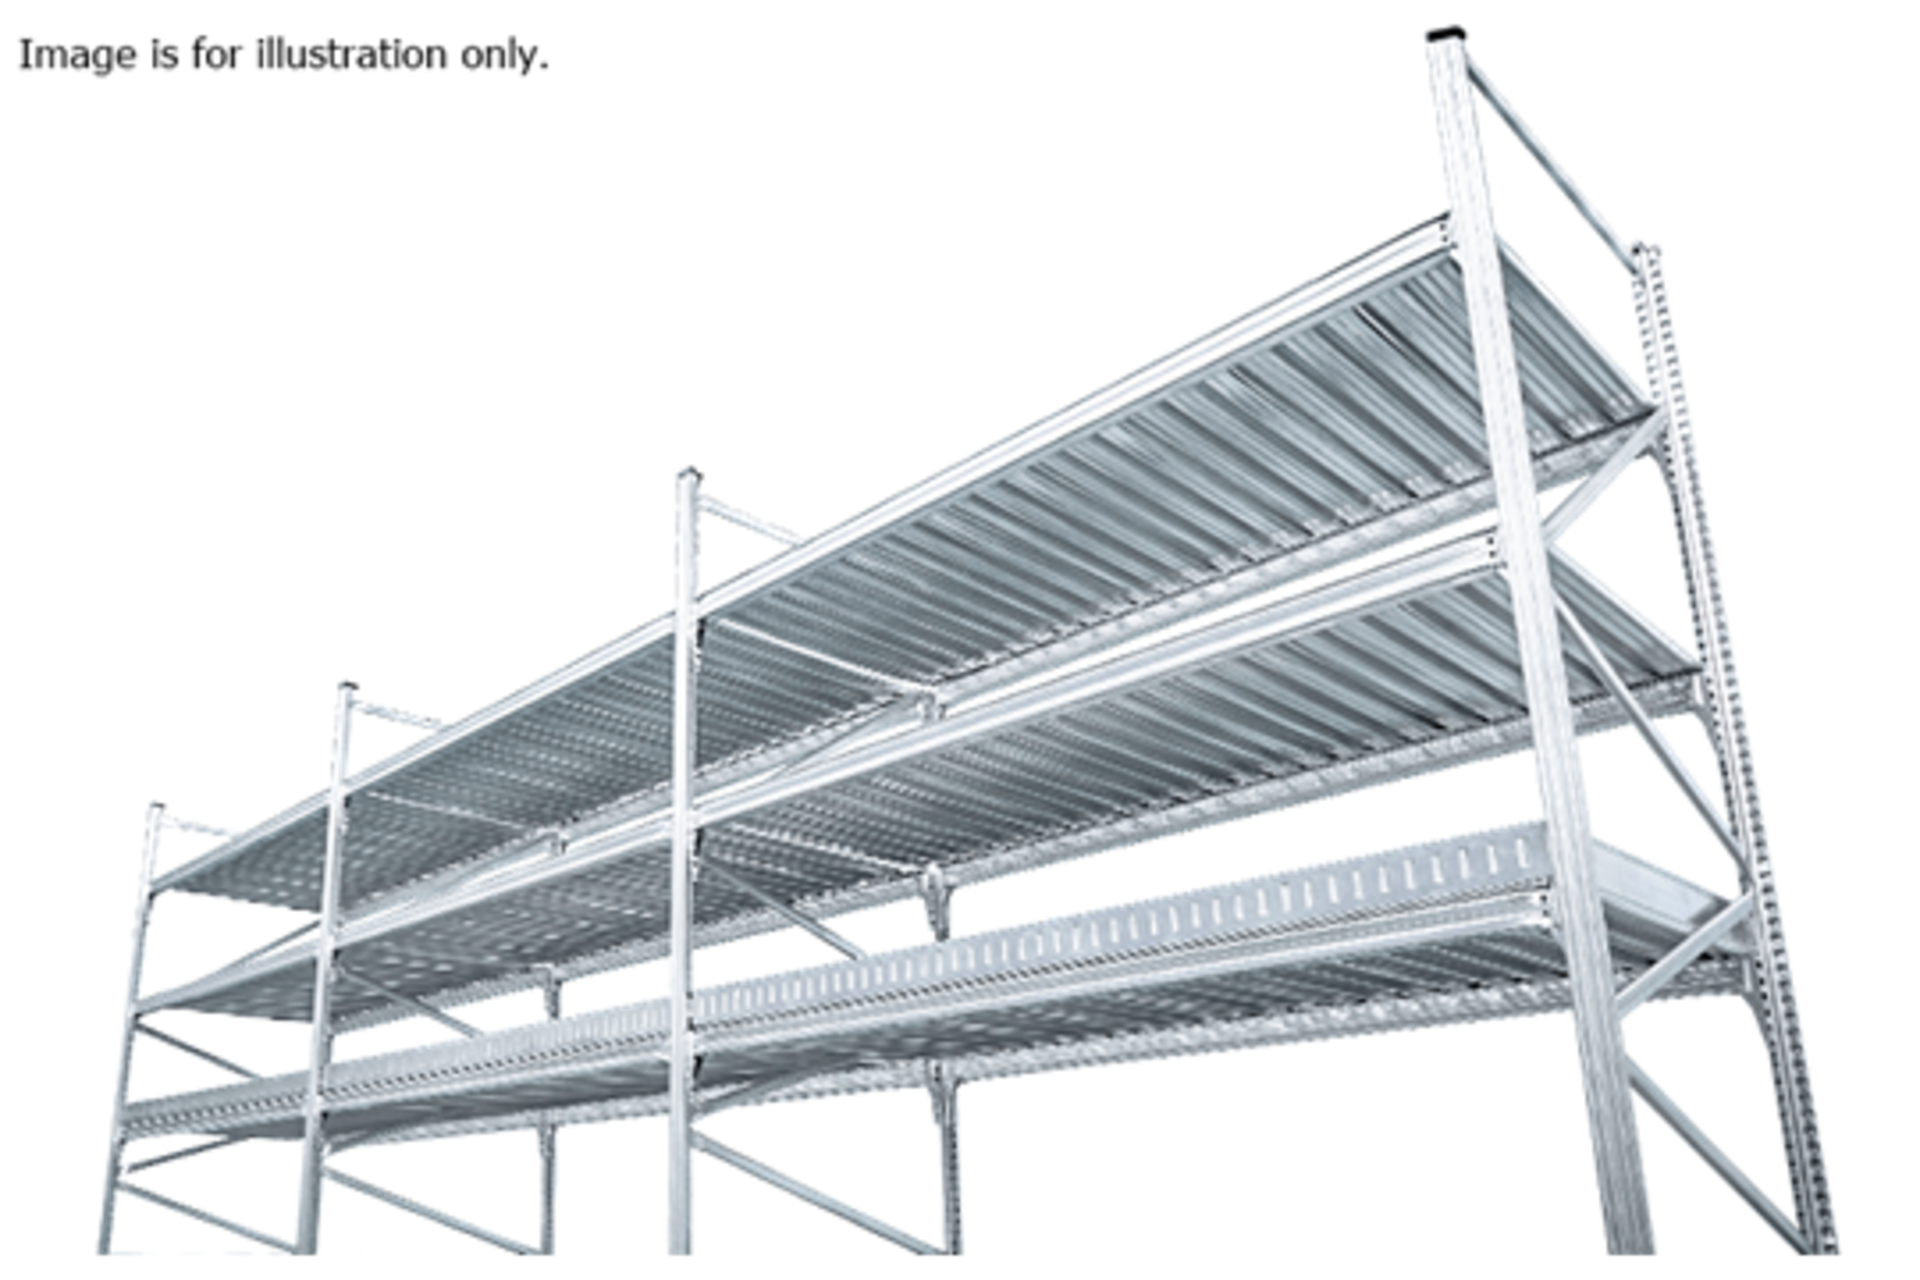 4 x Bays of Metalsistem Steel Modular Storage Shelving - Includes 37 Pieces - Recently Removed